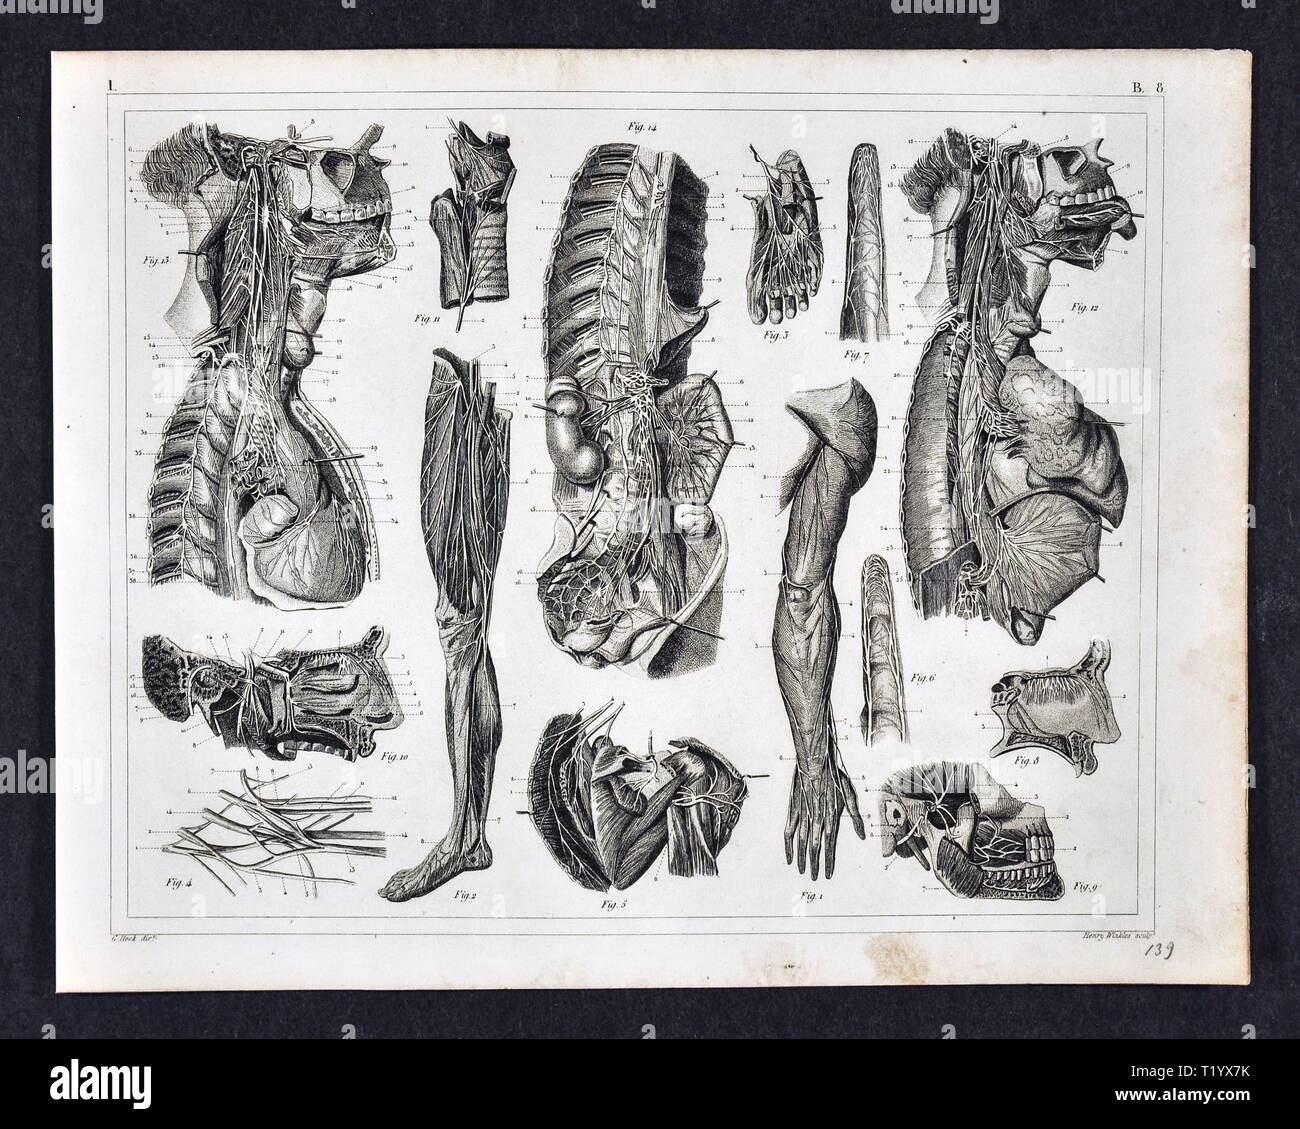 1849 Anatomy Print of the Human Muscular Skeletal System Dissection Stock Photo